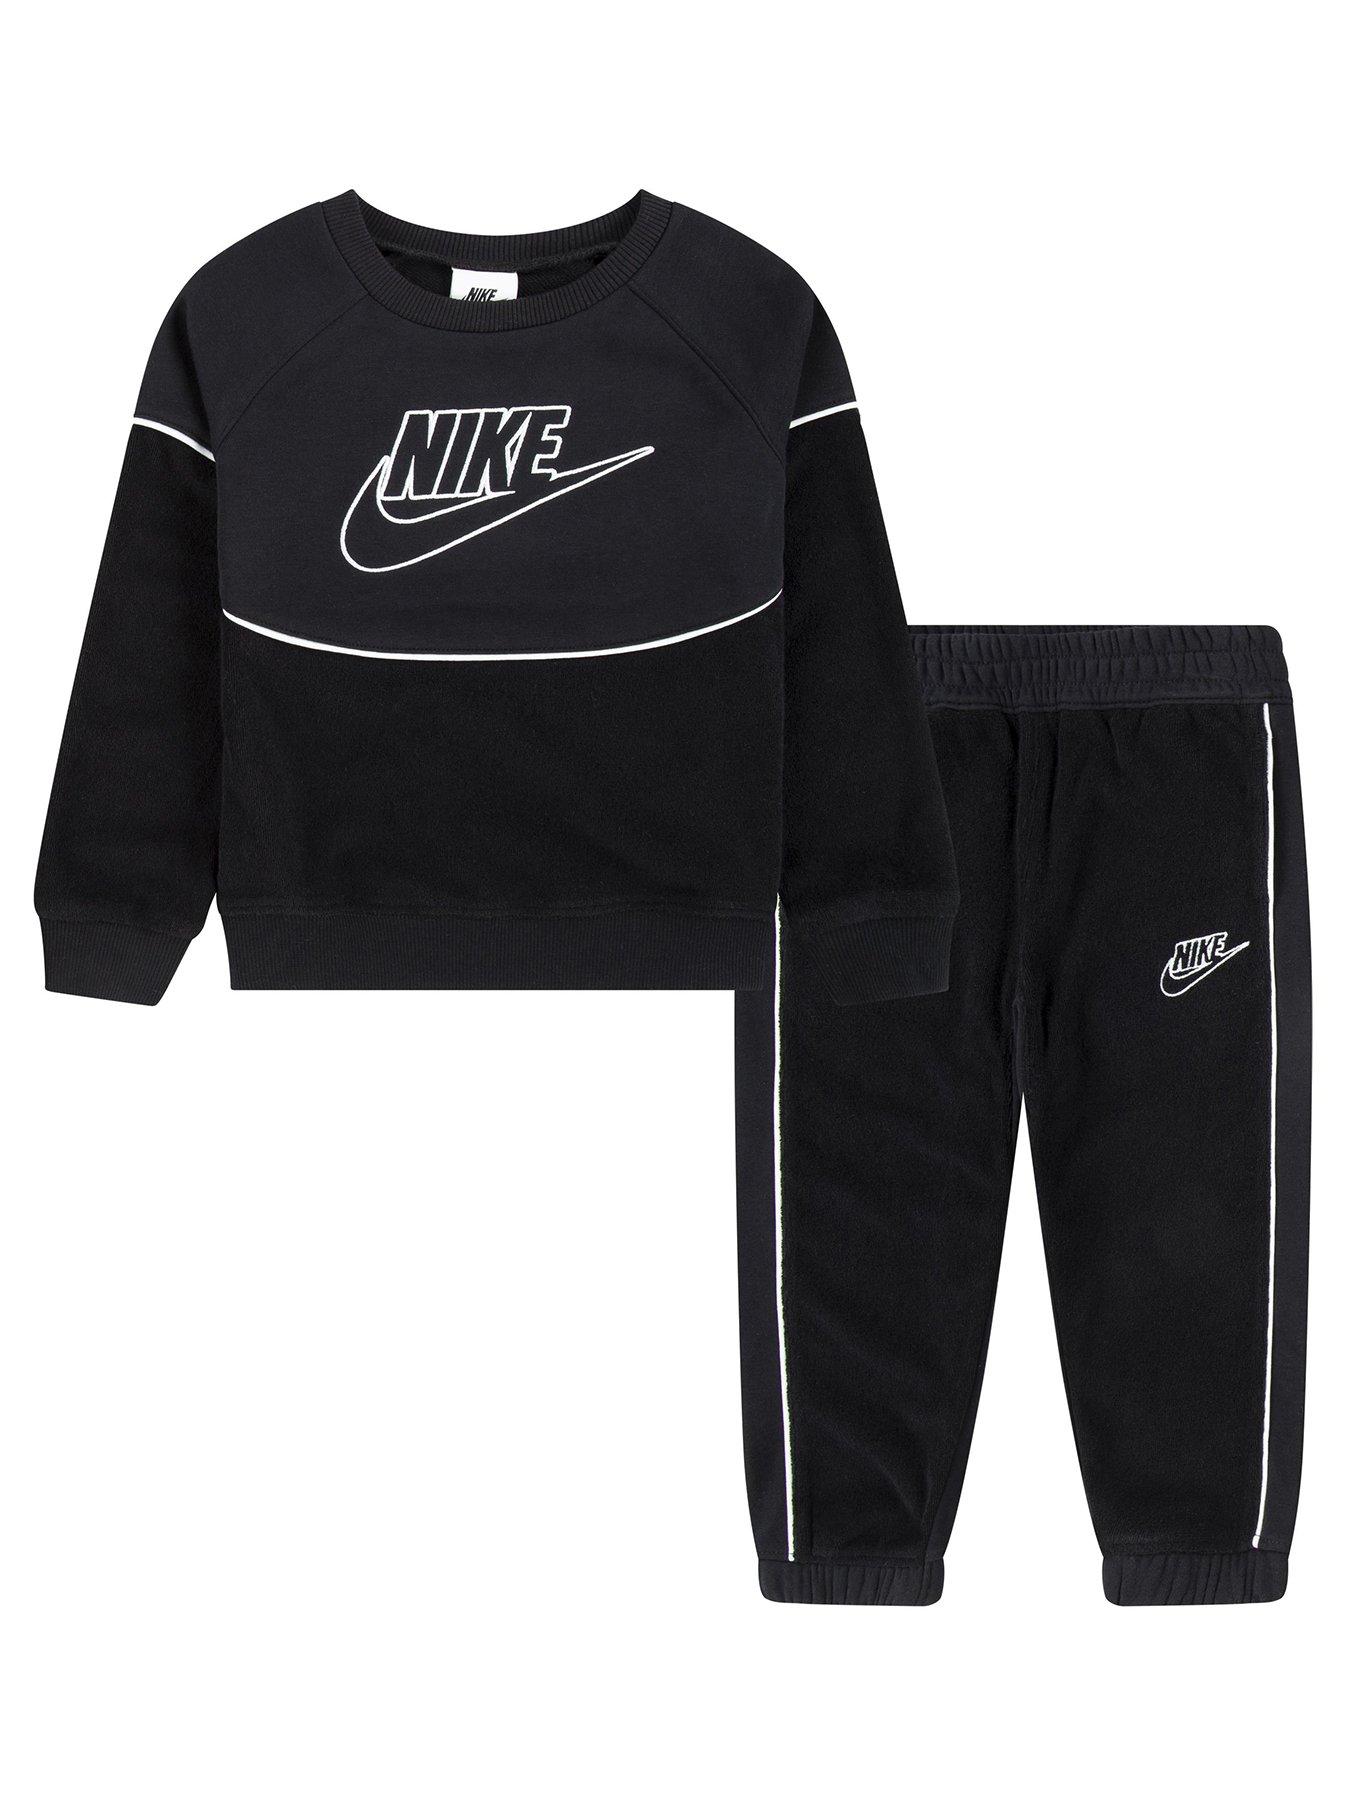 Black, Nike, Sportswear, Baby clothes, Child & baby